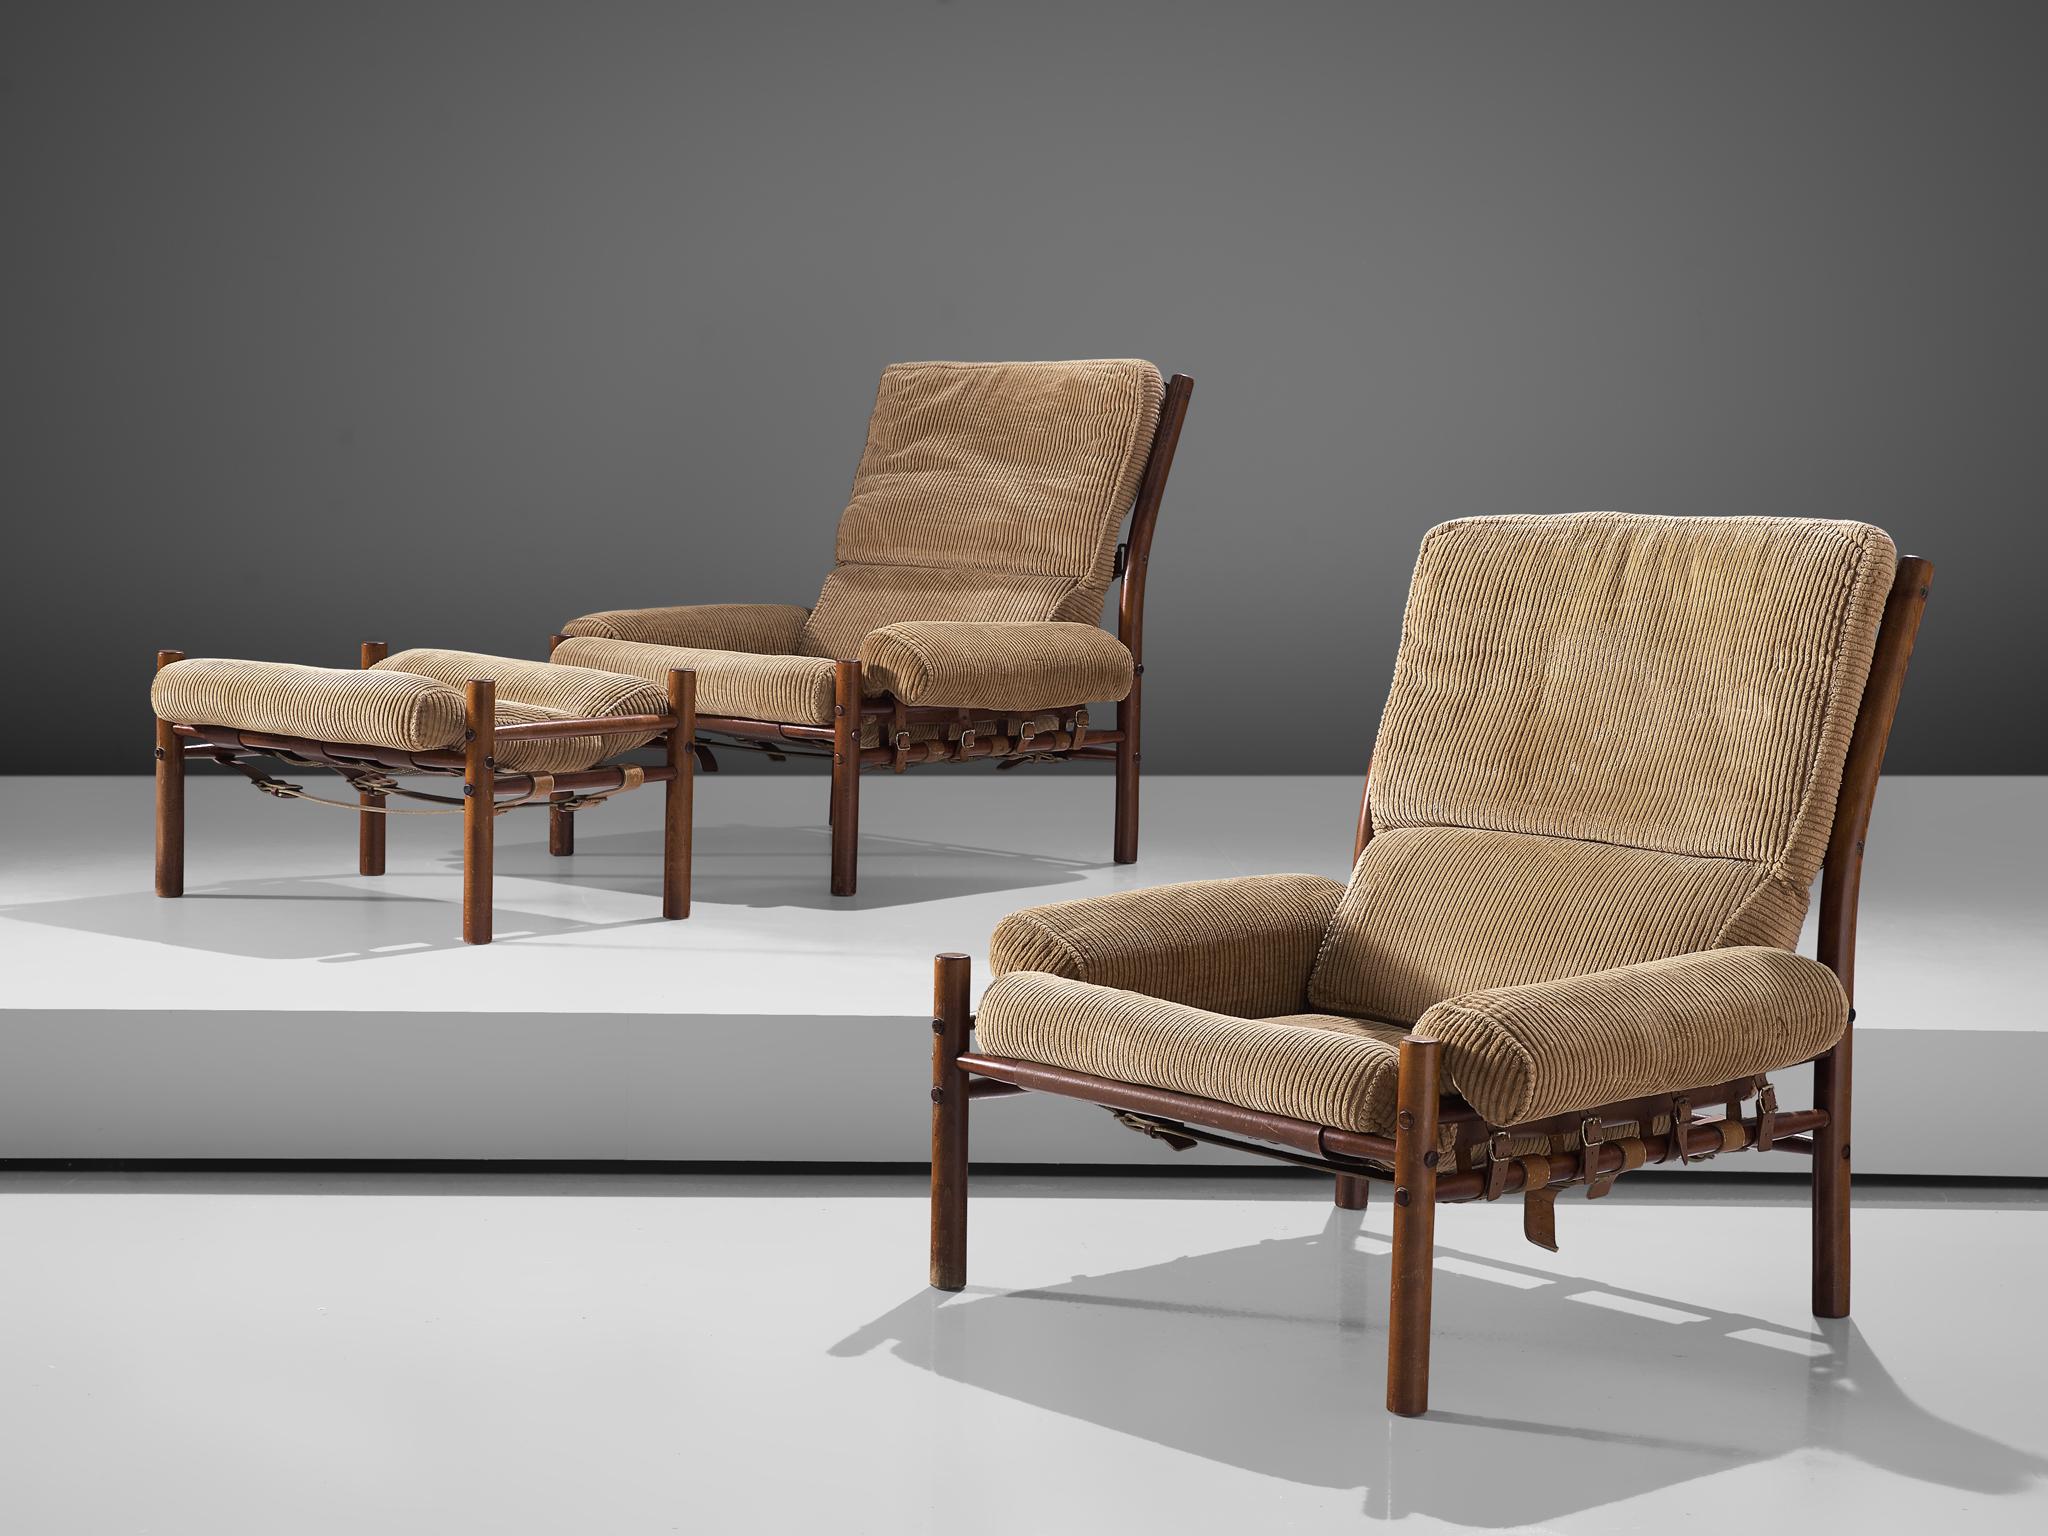 Arne Norell, 'Inca' lounge chair with ottoman, fabric, beech and leather, Sweden, 1965.

The iconic 'Inca' lounge chairs with ottoman in a sand color corduroy, designed by Arne Norell. The frame is made from stained beech. Moreover, the base of